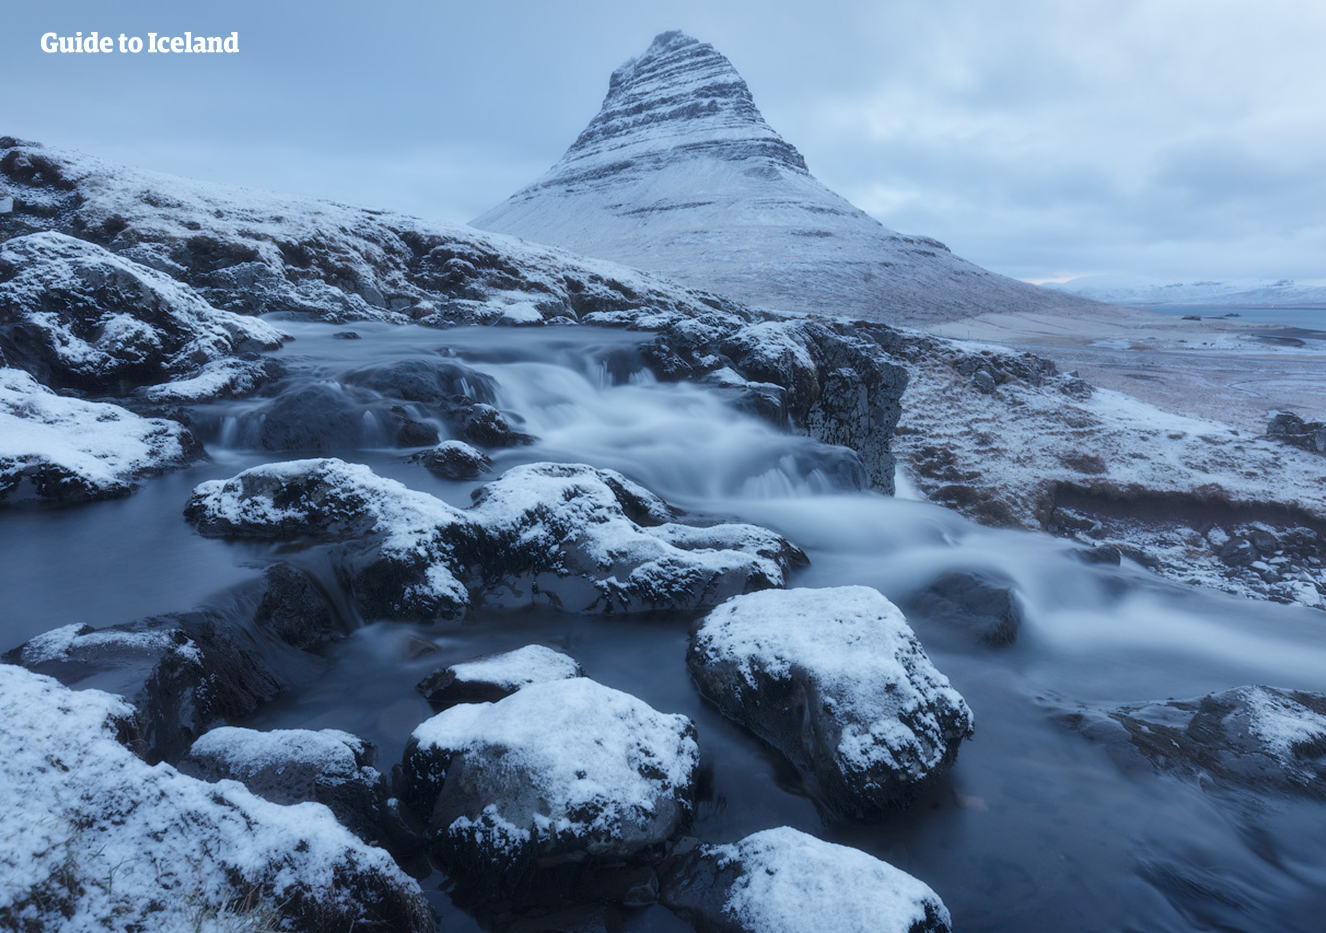 In winter and in summer, Kirkjufell is Iceland's most photographed mountain.